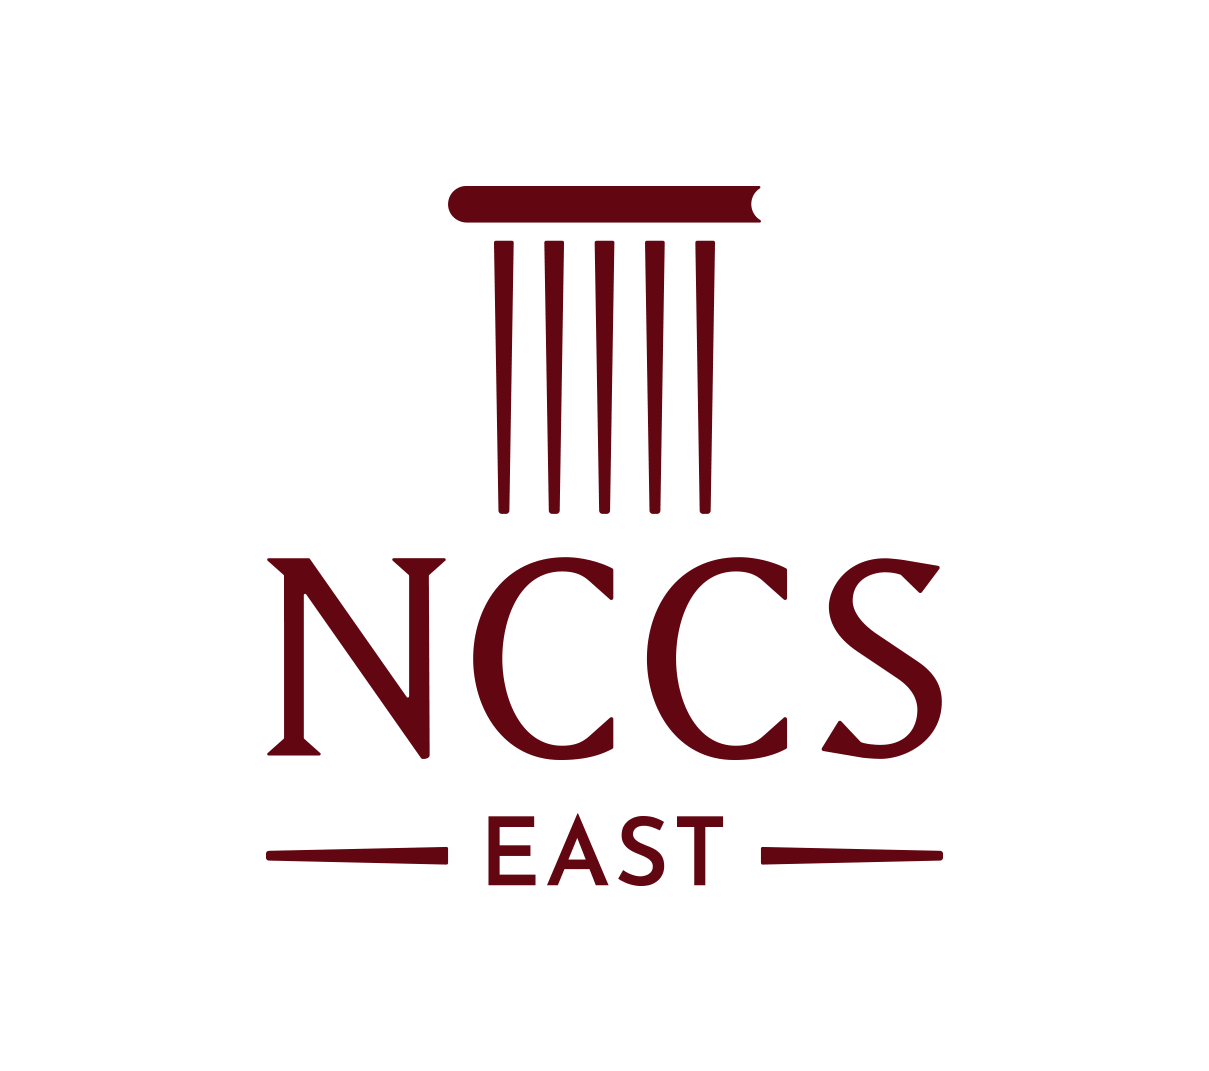 NCCS East mark as part of updated identity designed by ST8MNT